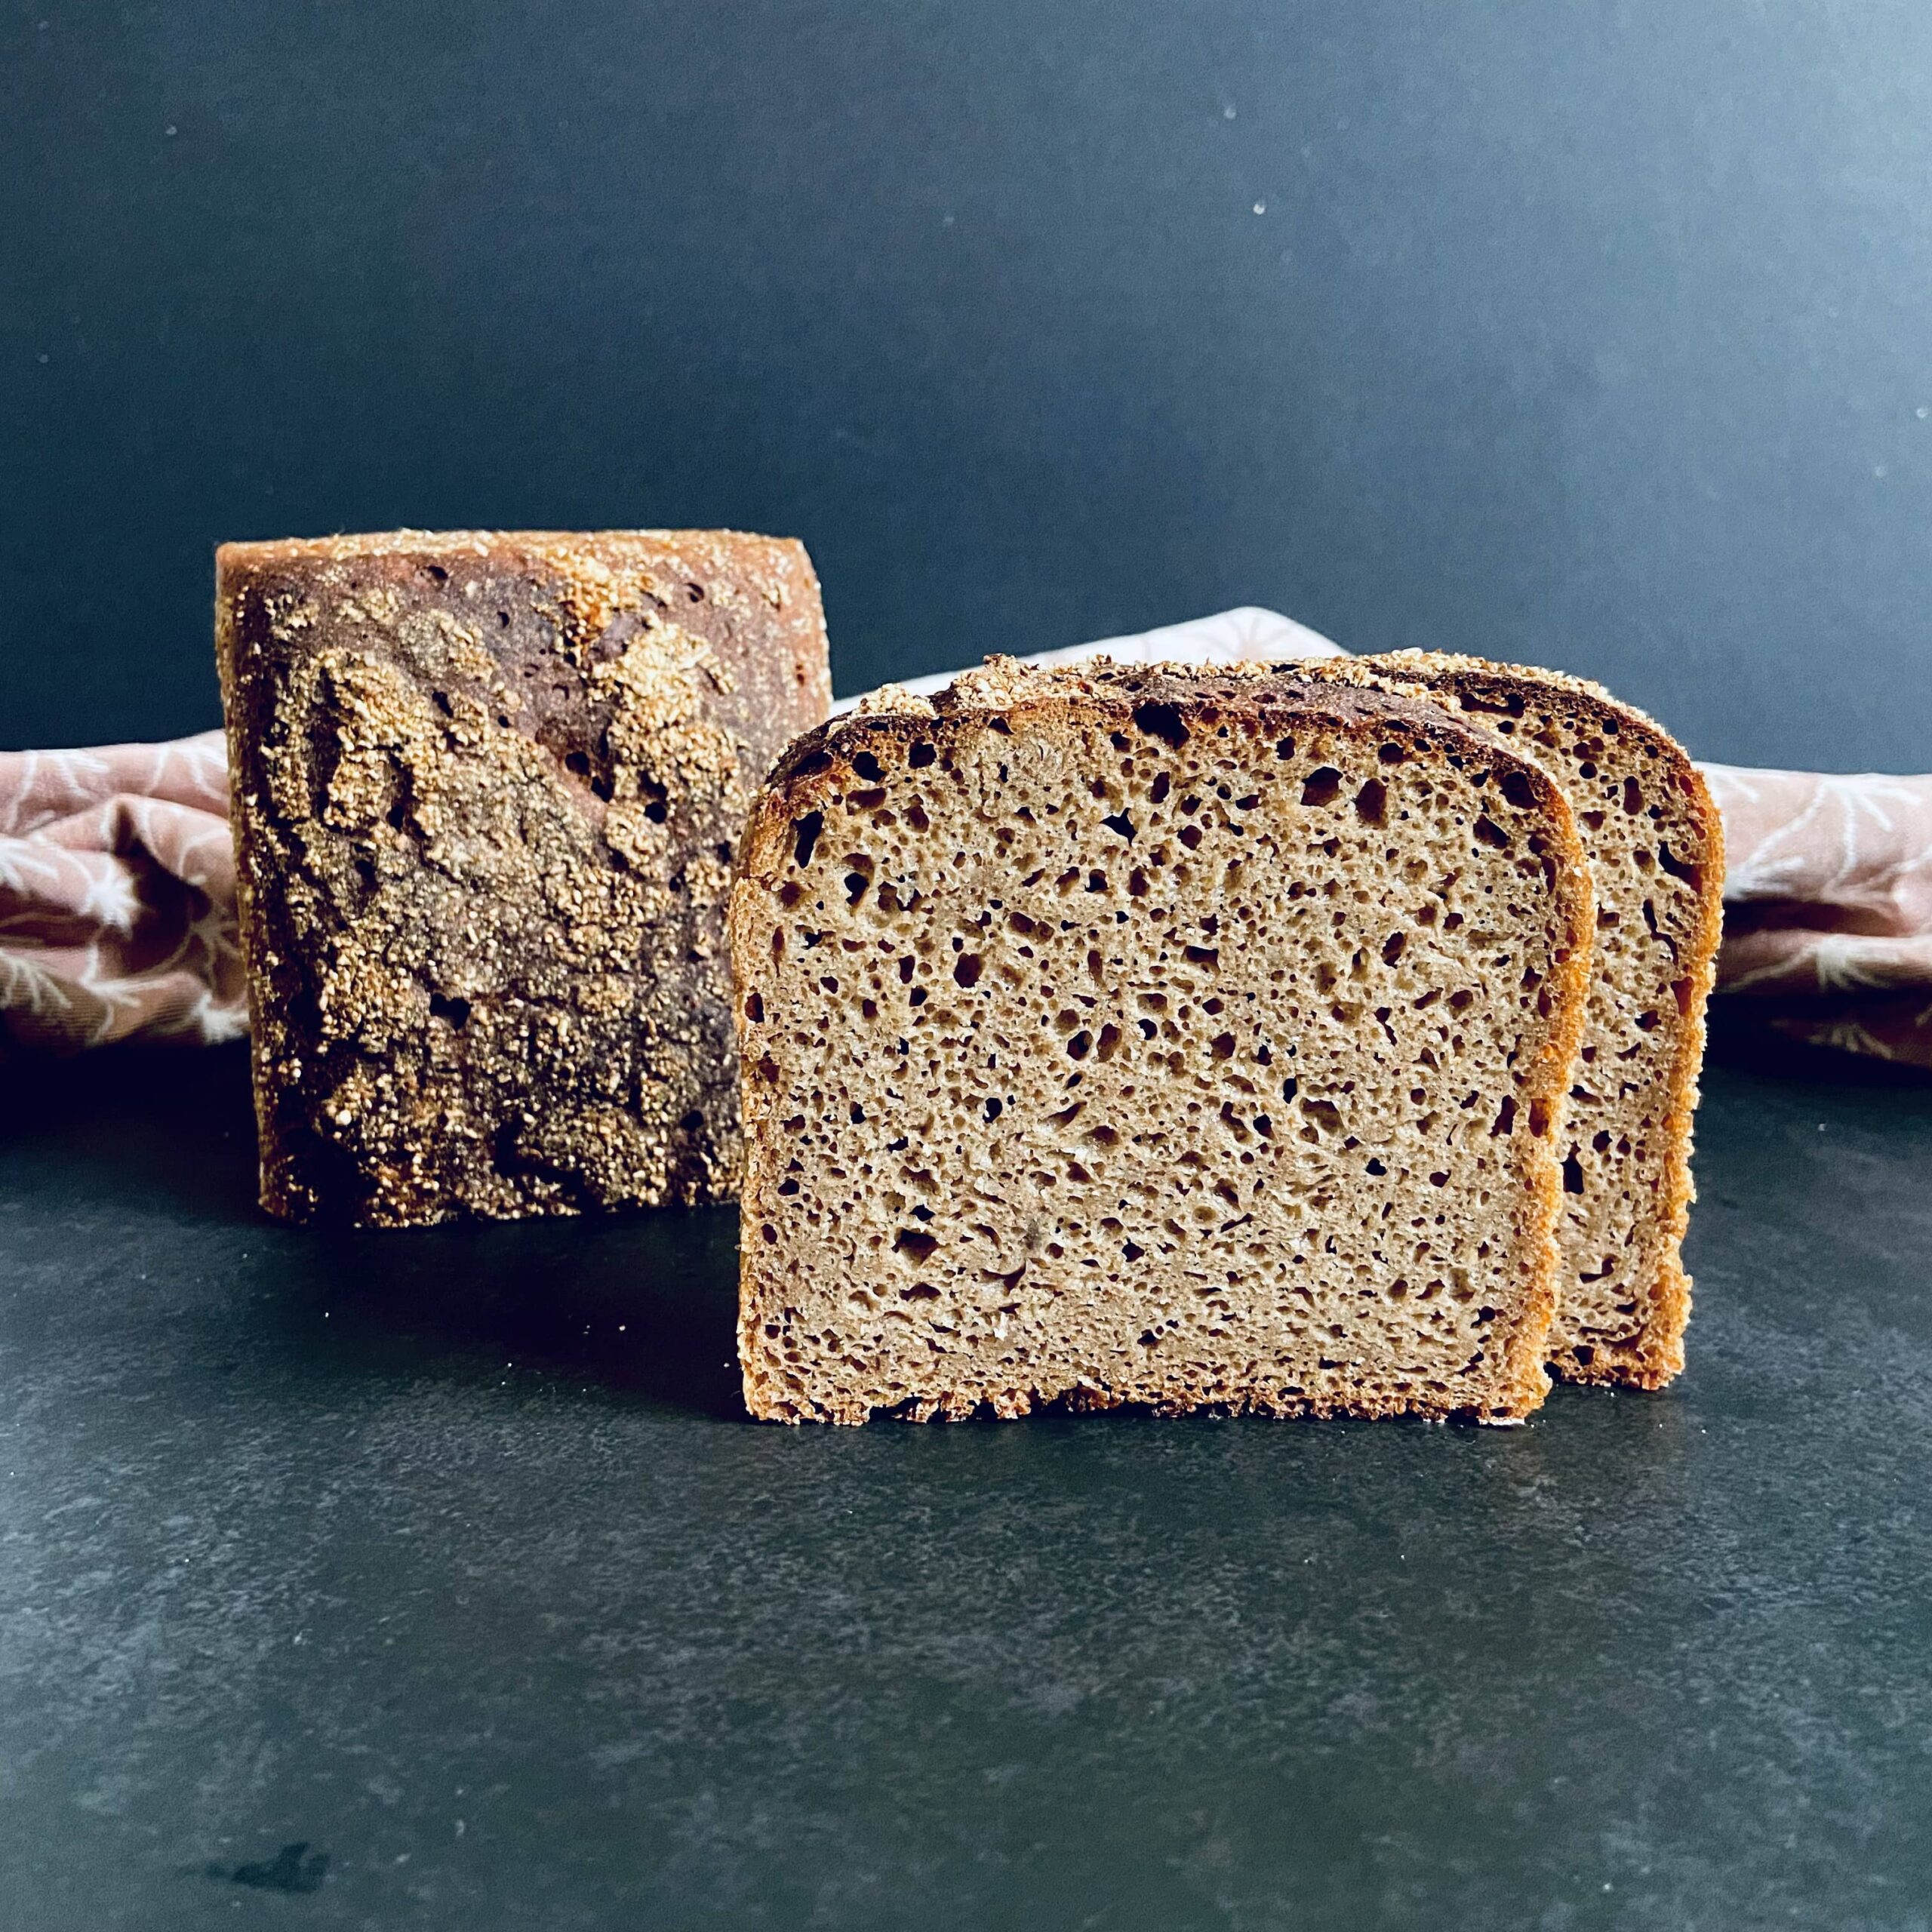 100% rye with dried plums